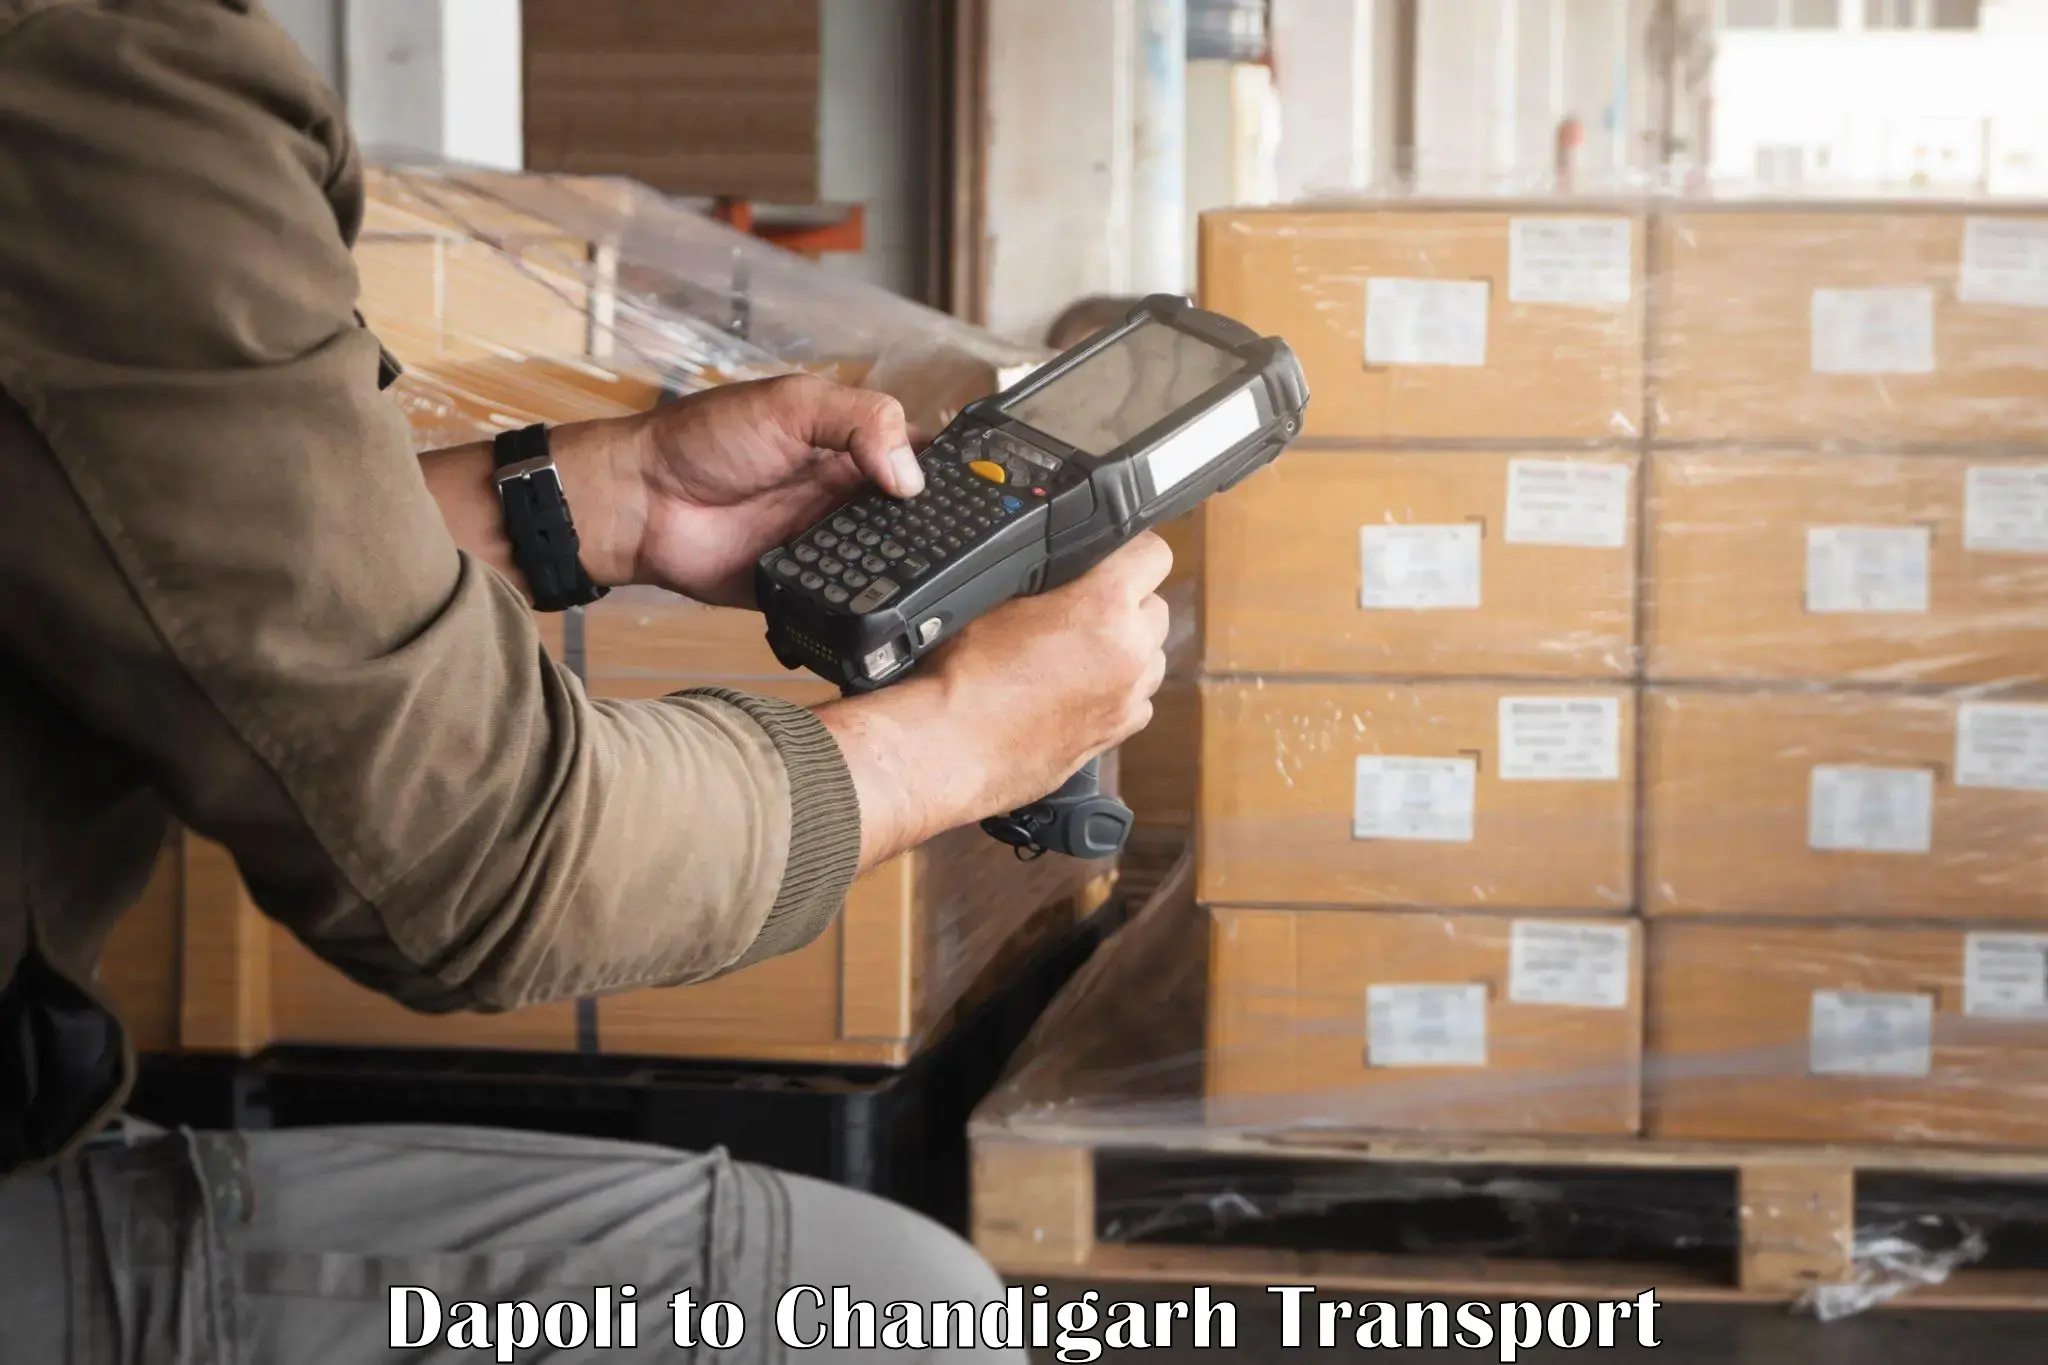 Goods delivery service Dapoli to Chandigarh